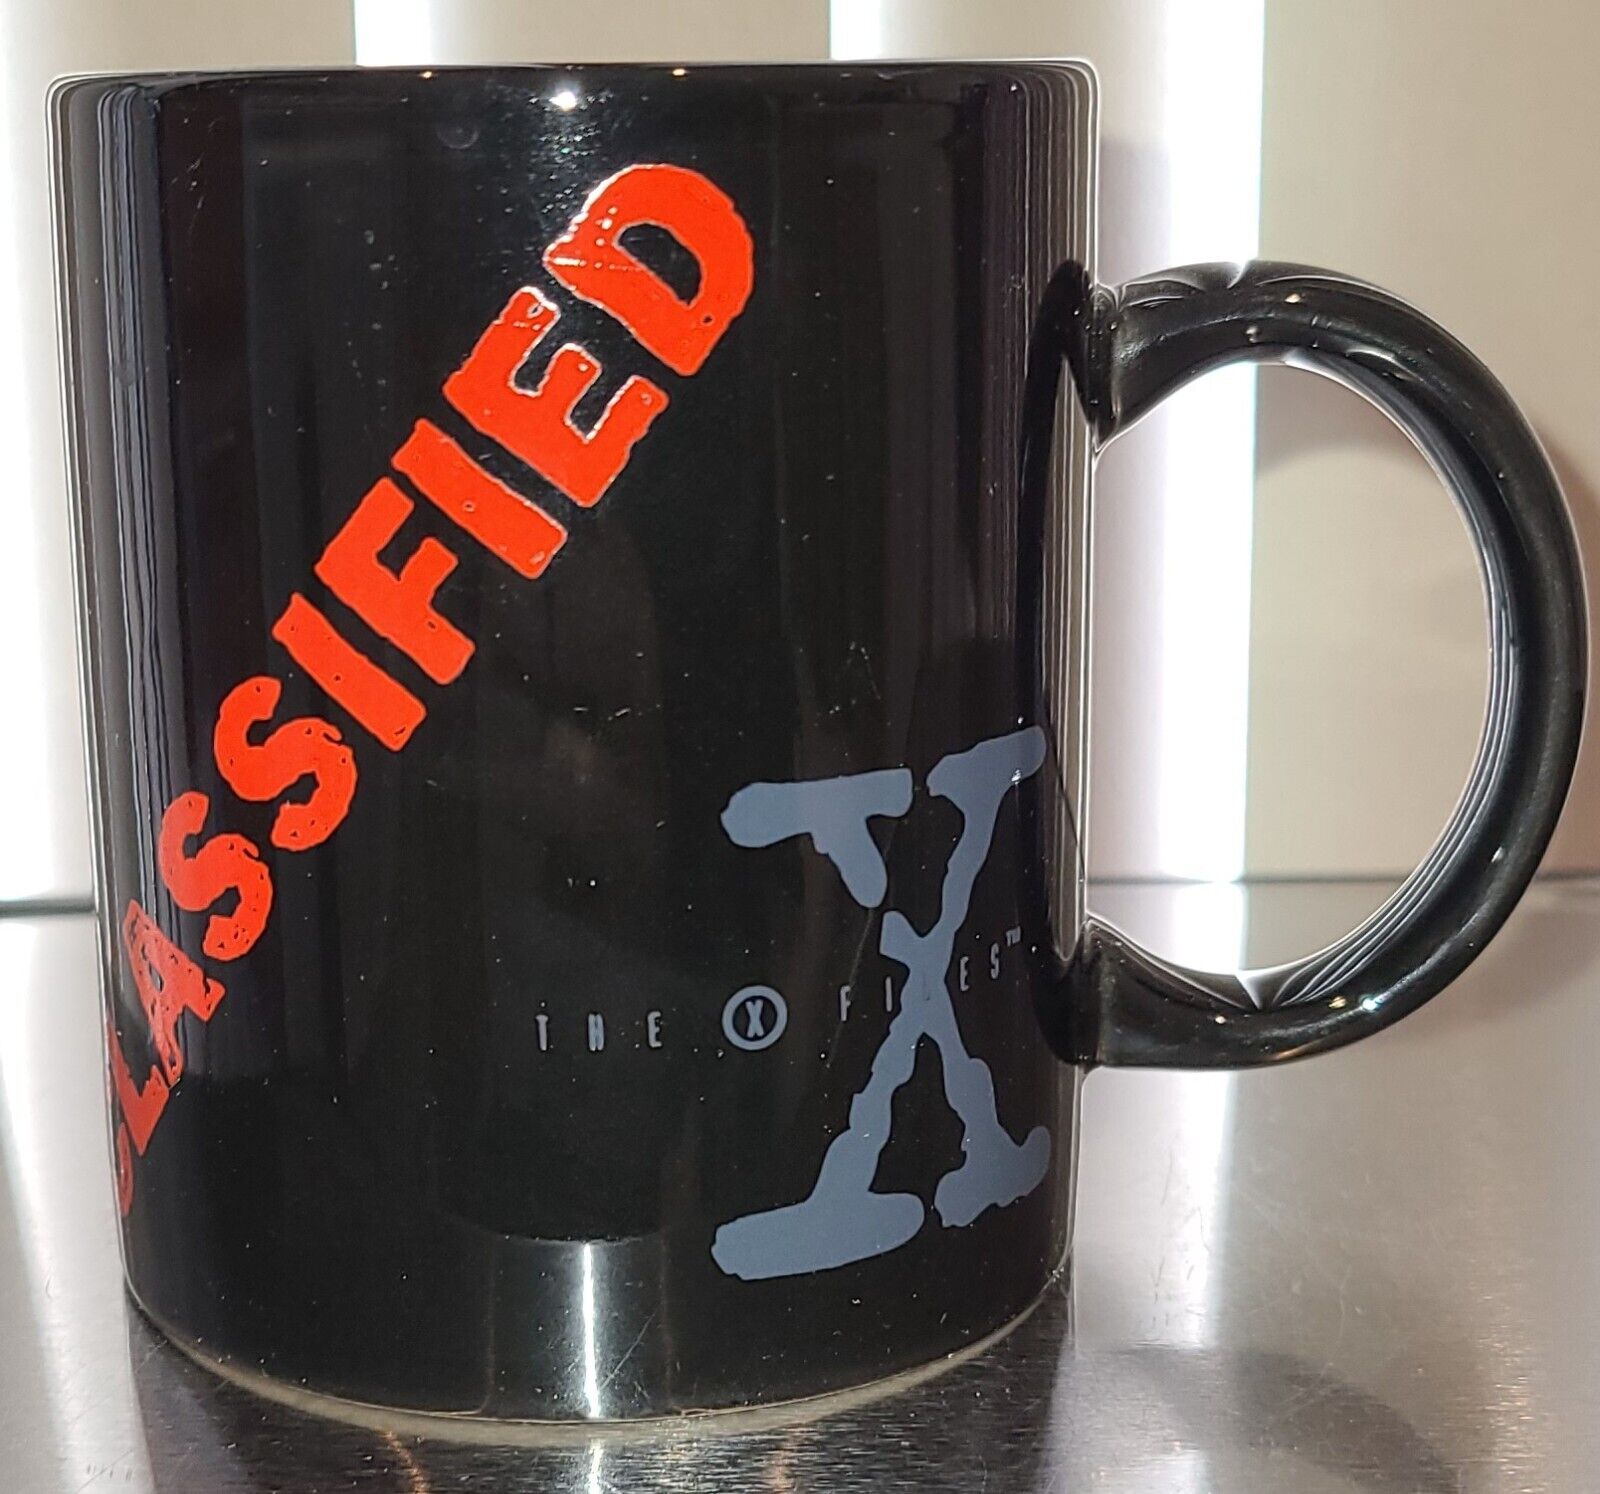 NEW Official Vintage The X-Files Classified Coffee Mug Cup 1996 20th Century HTF